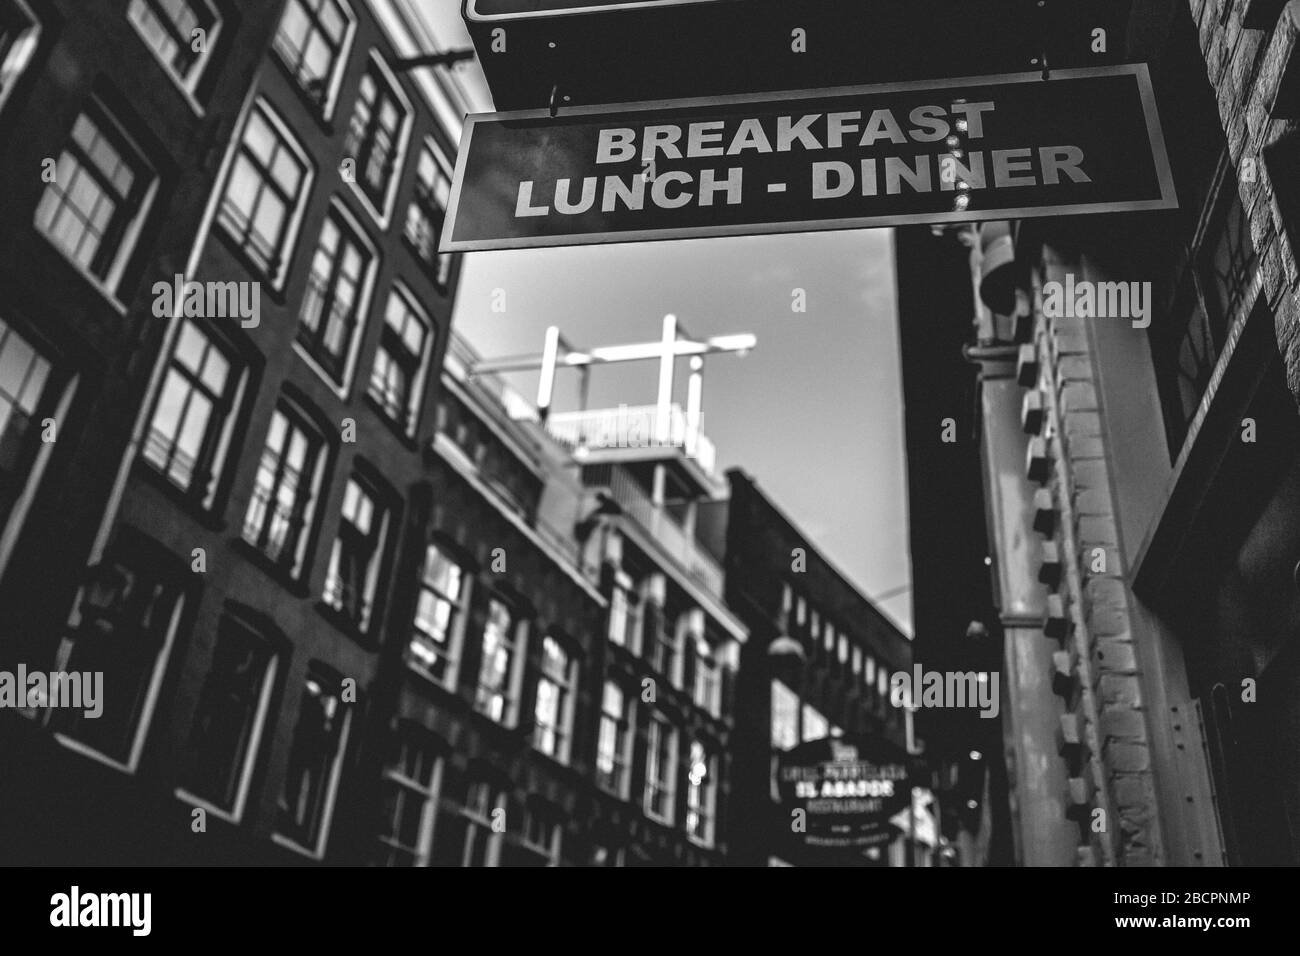 Old town architecture with Breakfast Lunch Dinner sign in the Warmoesstraat in Amsterdam, The Netherlands Stock Photo